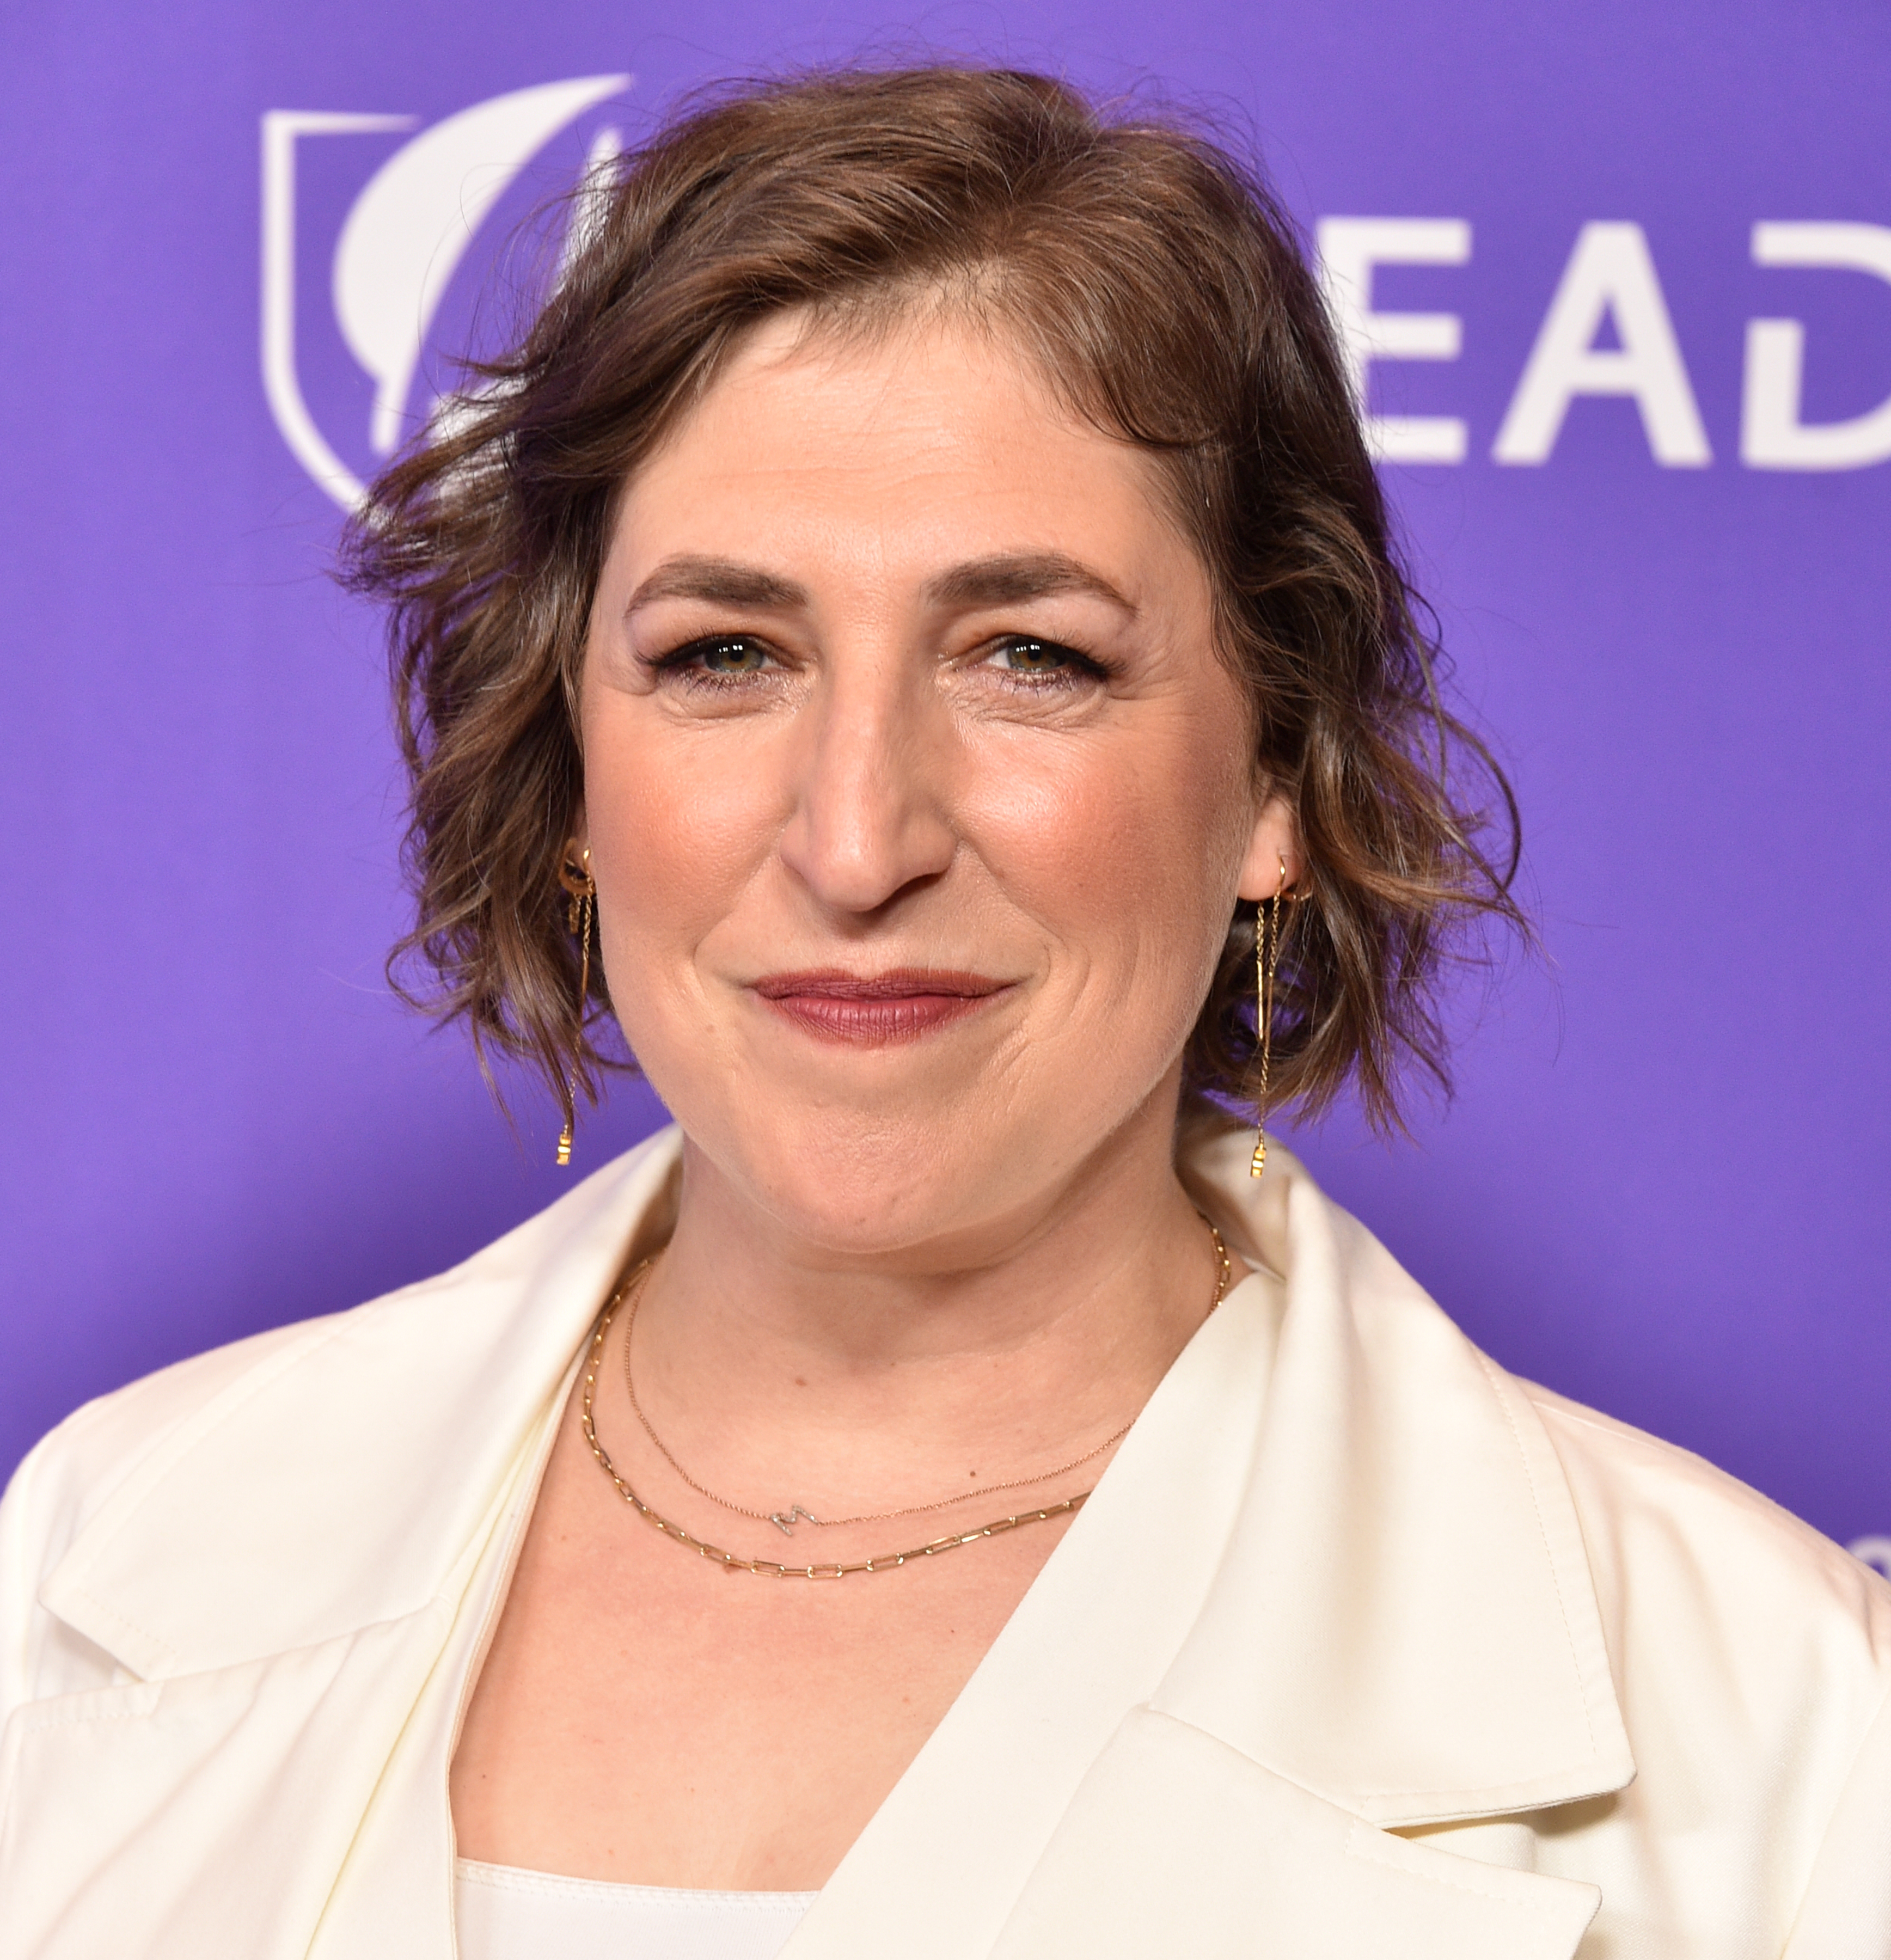 Mayim Bialik attends a gala in Los Angeles, California on April 22, 2023 | Source: Getty Images